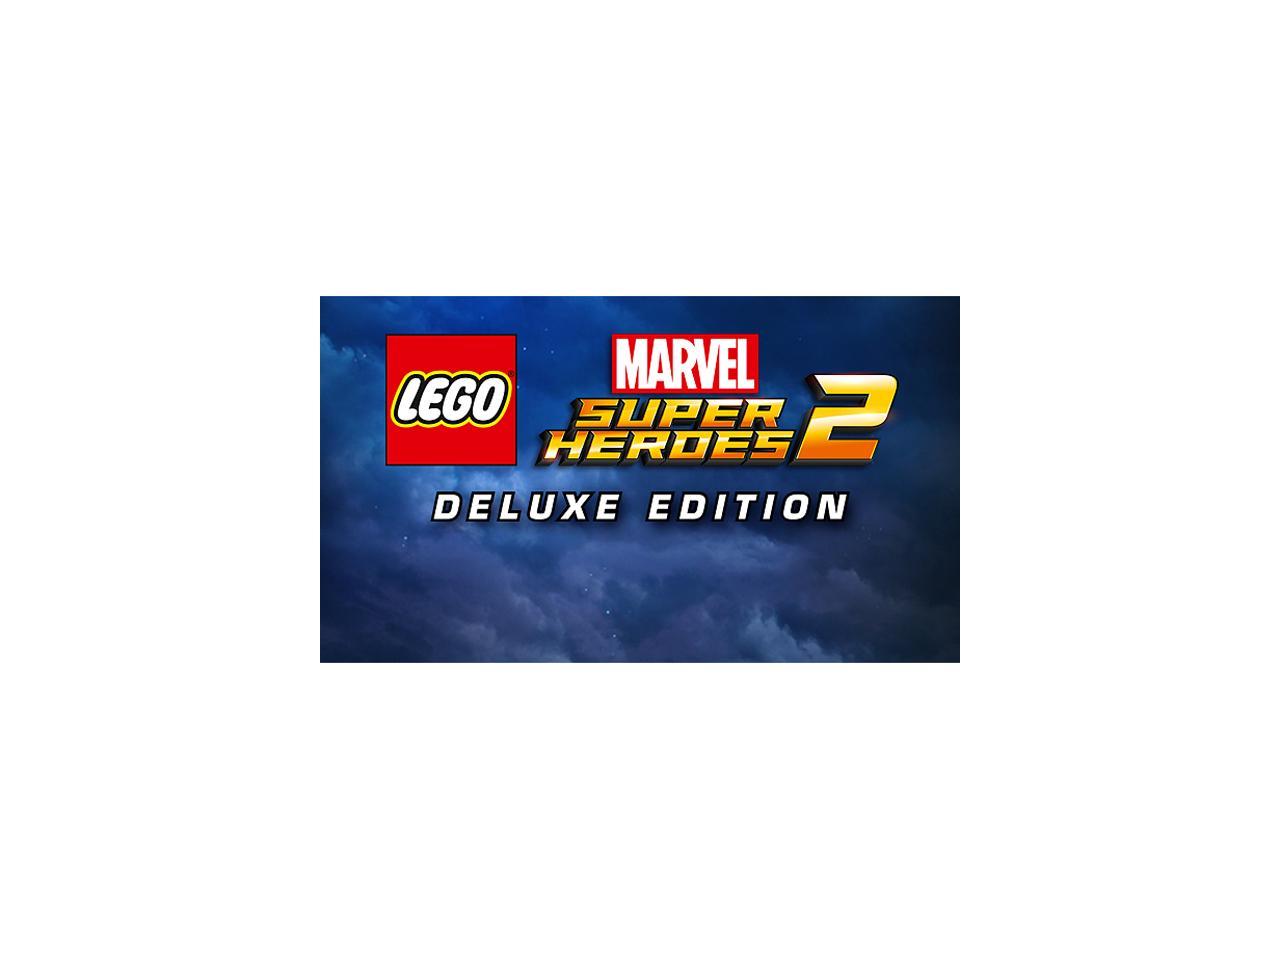 LEGO Marvel Super Heroes 2 - Deluxe Edition [Online Game Code]